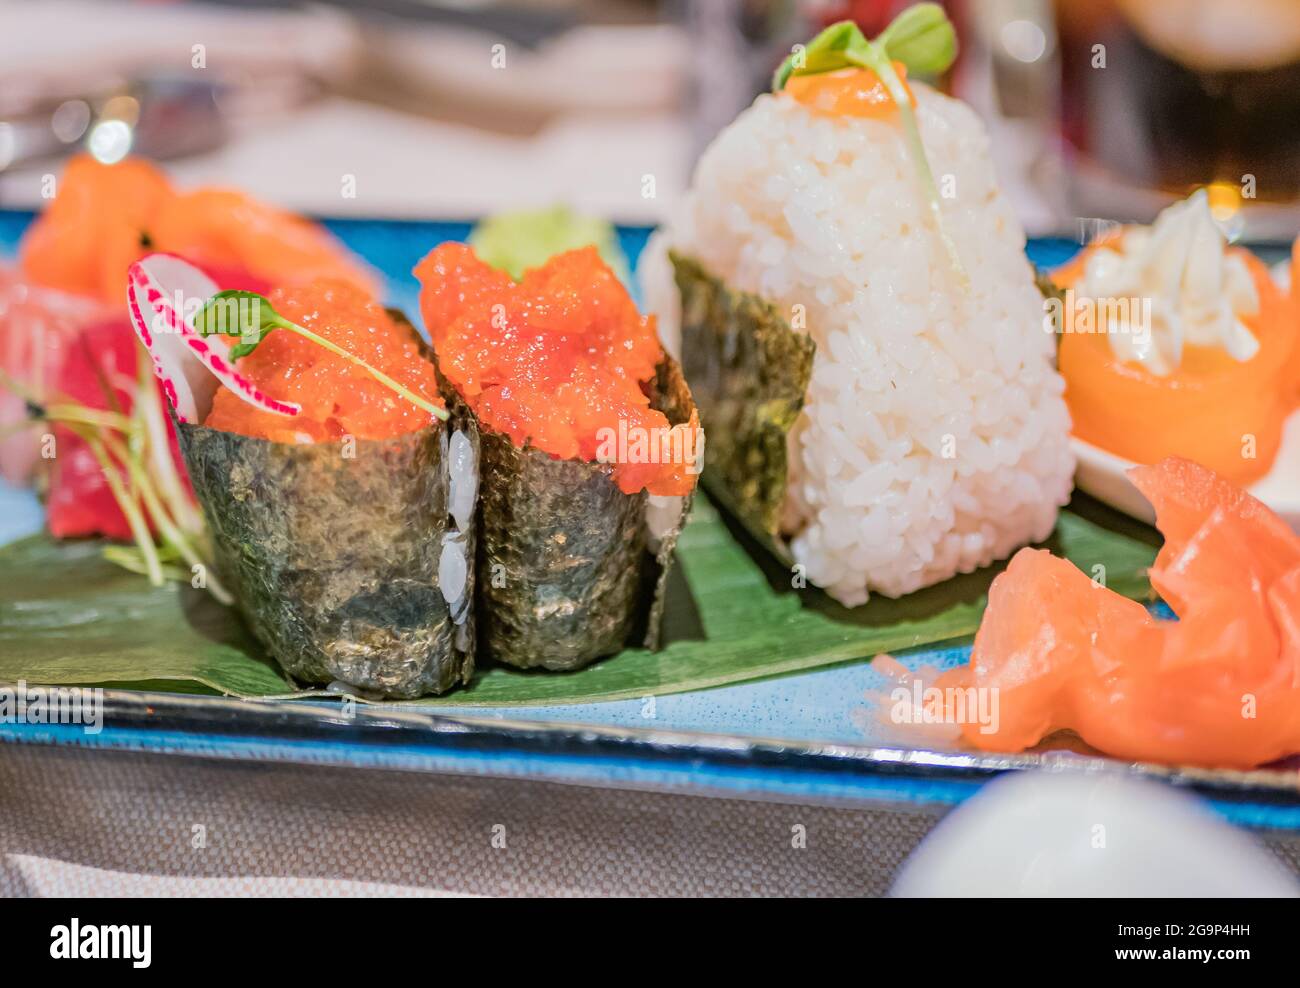 Typical Japanese dish of raw salmon with rice wrapped with dried seaweed and vegetables on a blue plate Stock Photo